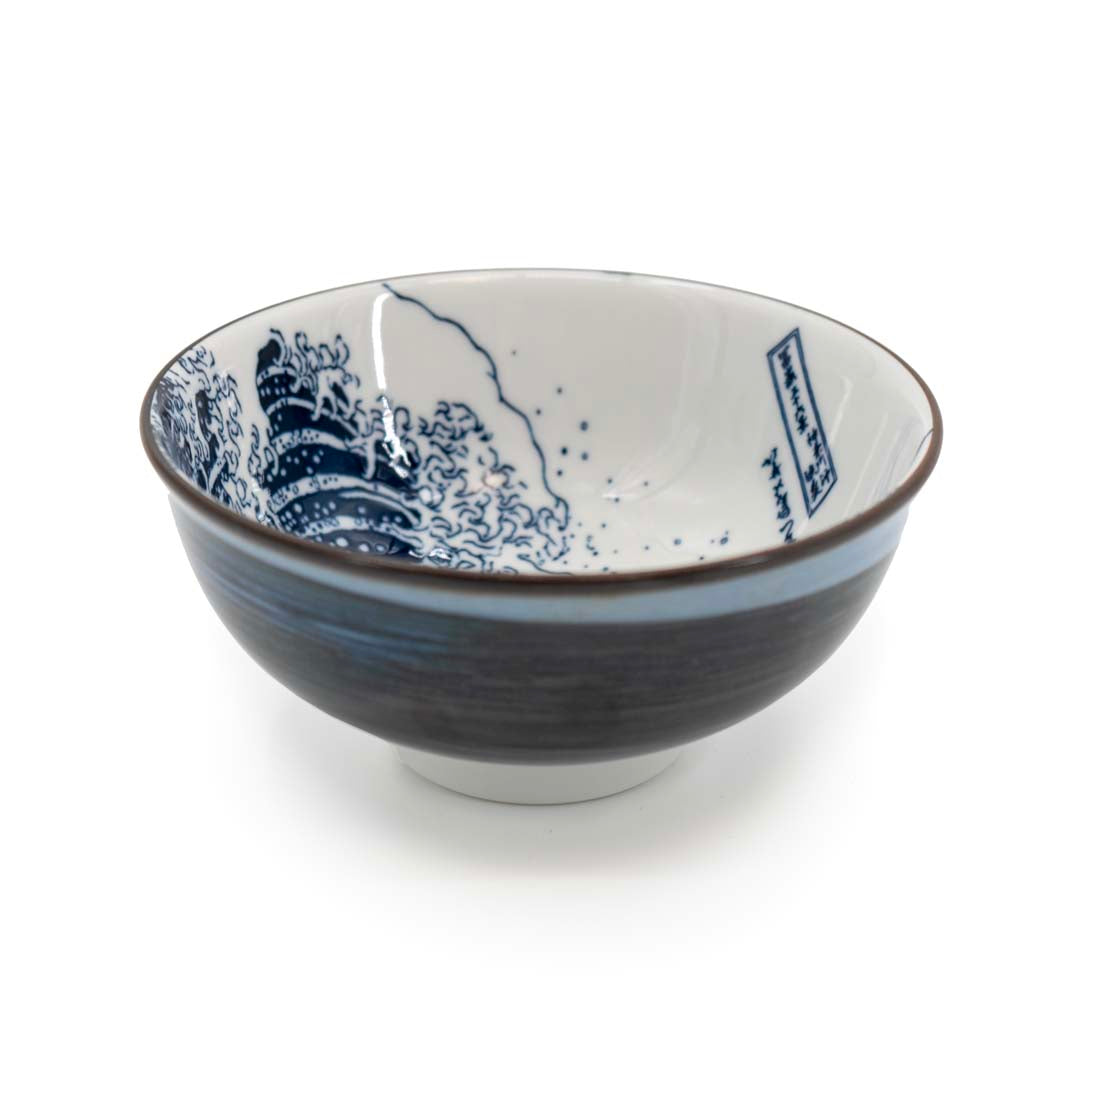 The Great Wave Ceramic Rice Bowl